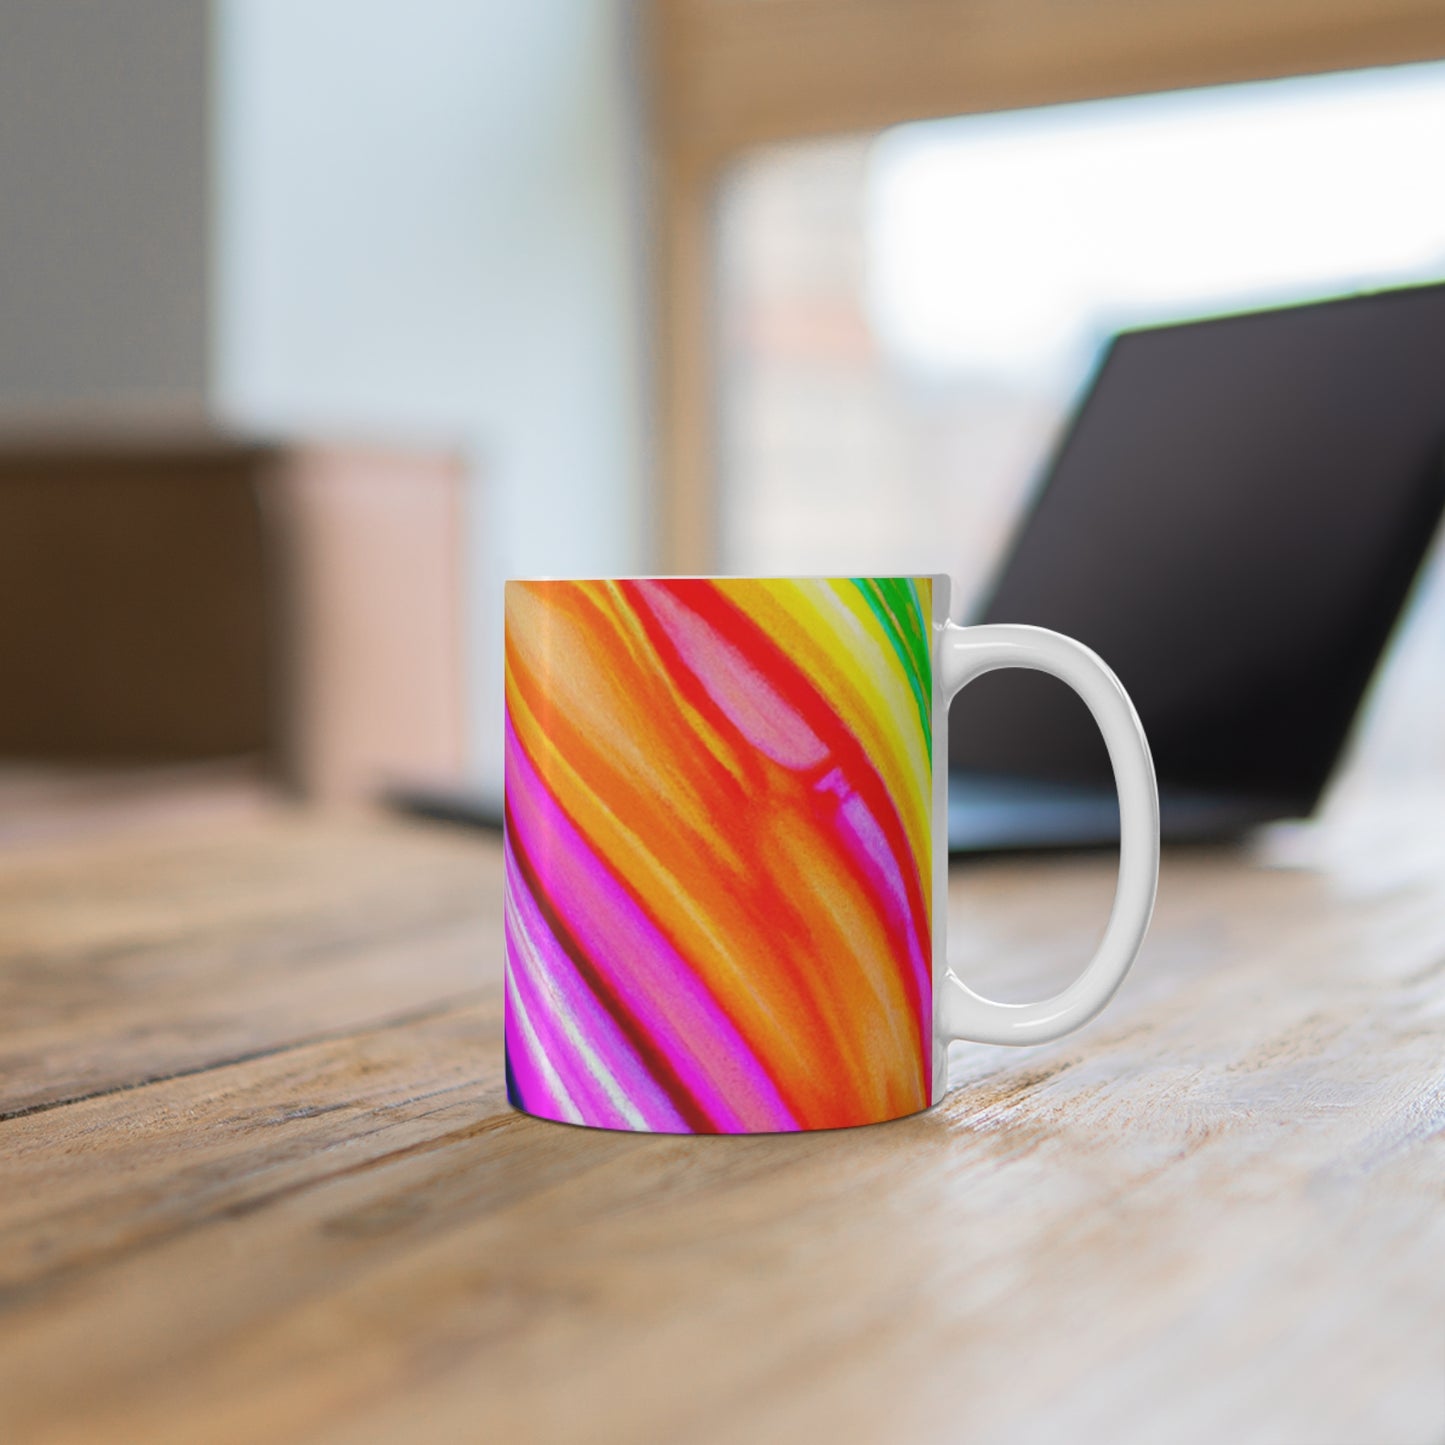 Coffee By Noel - Psychedelic Coffee Cup Mug 11 Ounce